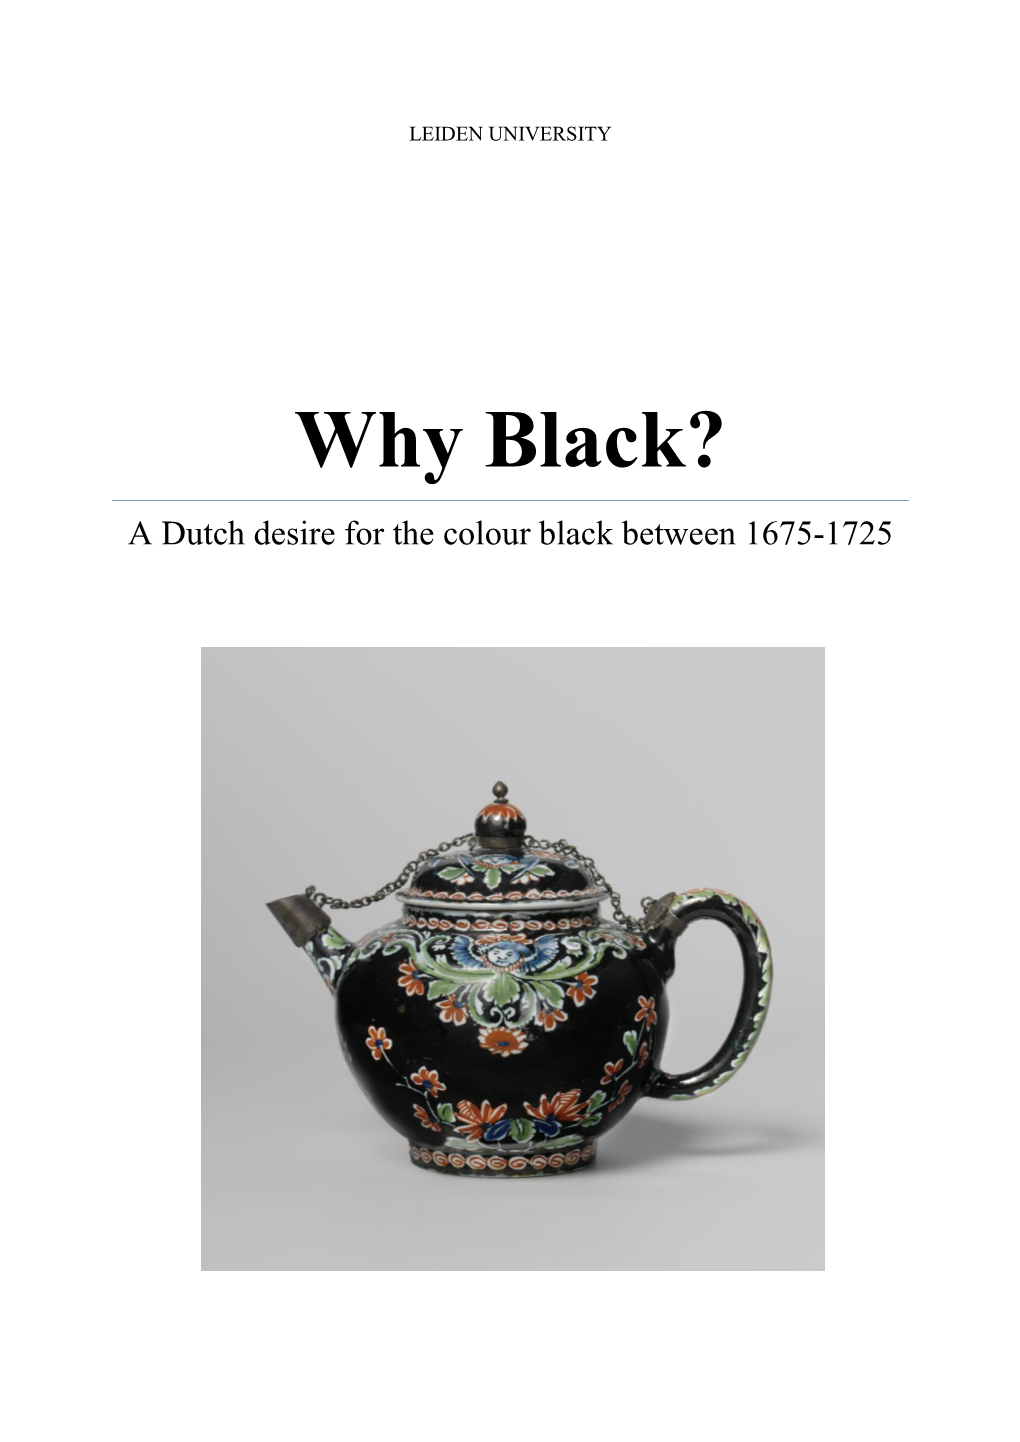 Why Black? a Dutch Desire for the Colour Black Between 1675-1725